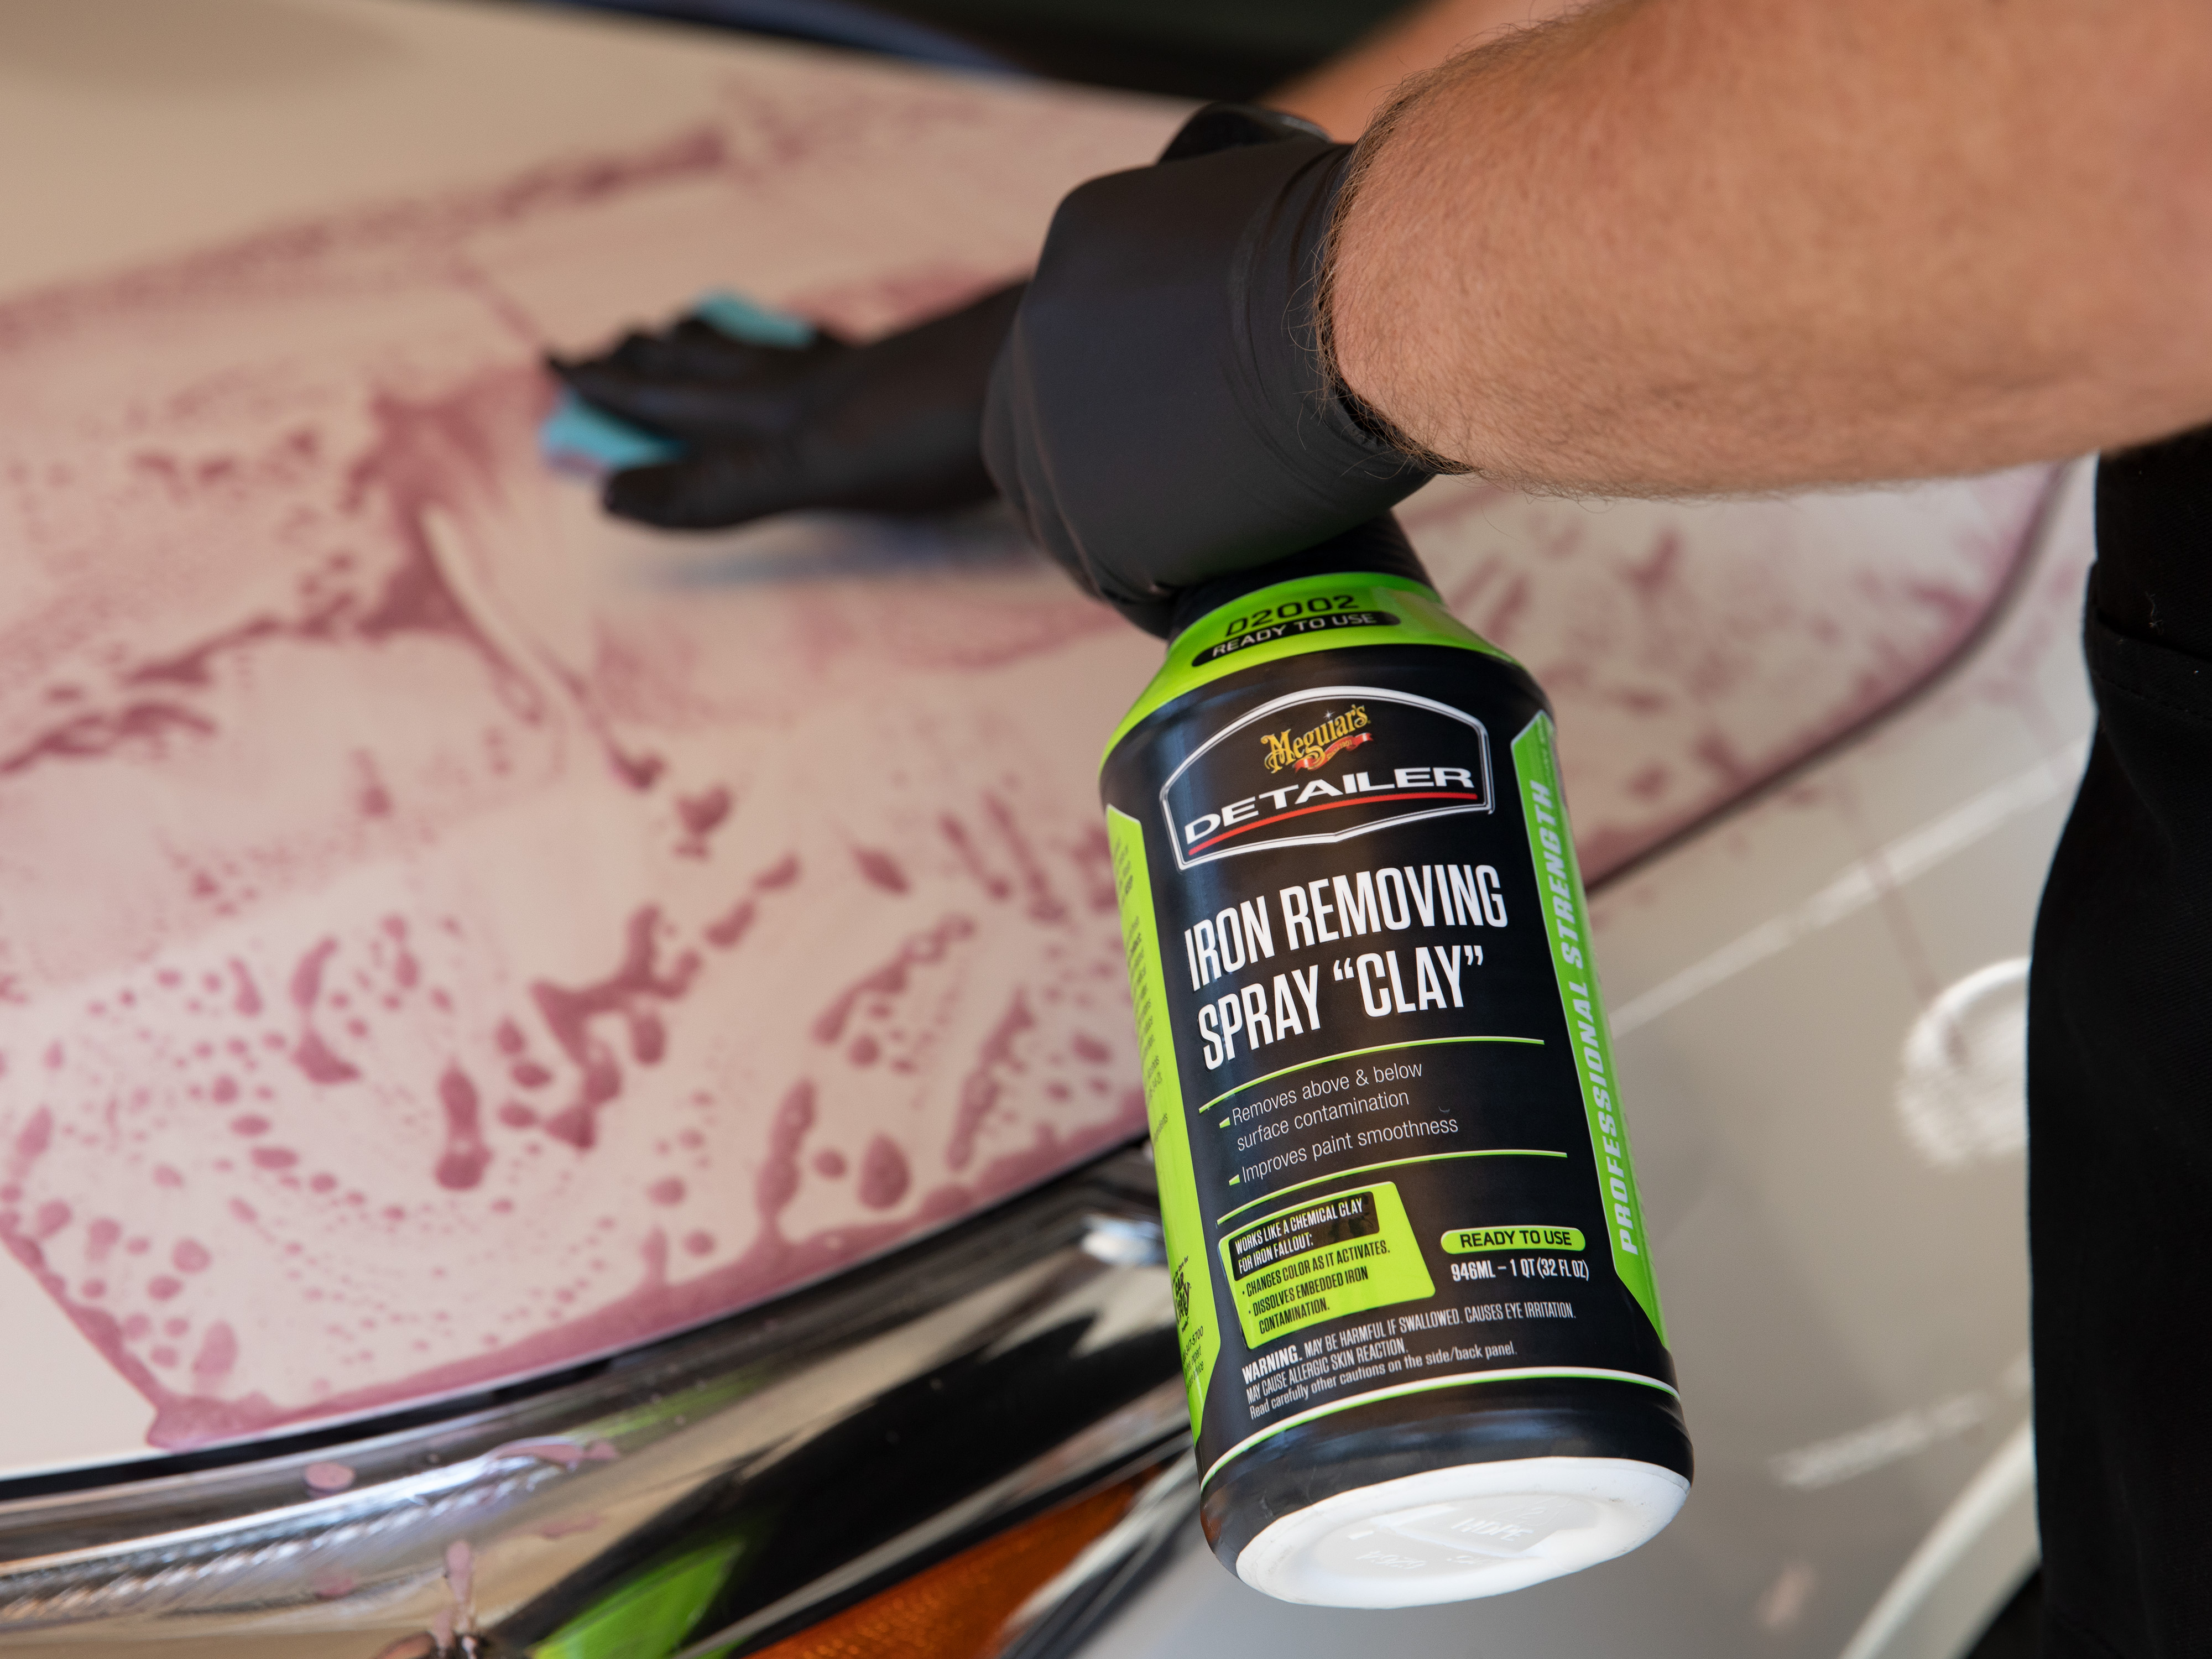 Meguiar's Iron Removing Spray Clay - Industrial Fallout & Iron